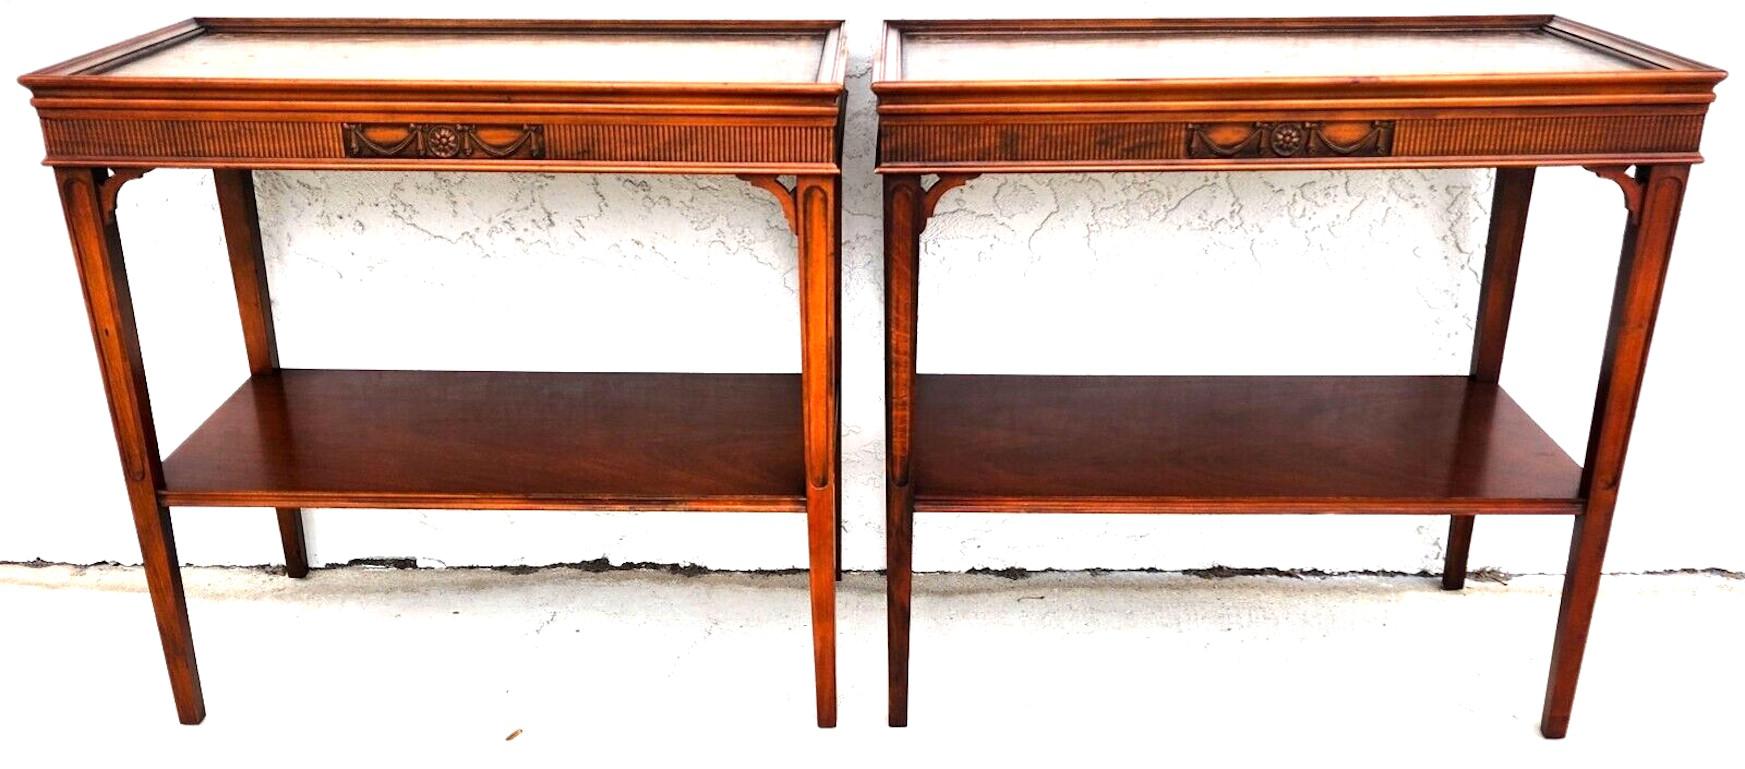 For FULL item description click on CONTINUE READING at the bottom of this page.

Offering One Of Our Recent Palm Beach Estate Fine Furniture Acquisitions Of A
Set of 2 Mid Century Italian Style Walnut Side End Tables with Tooled Leather Tops 